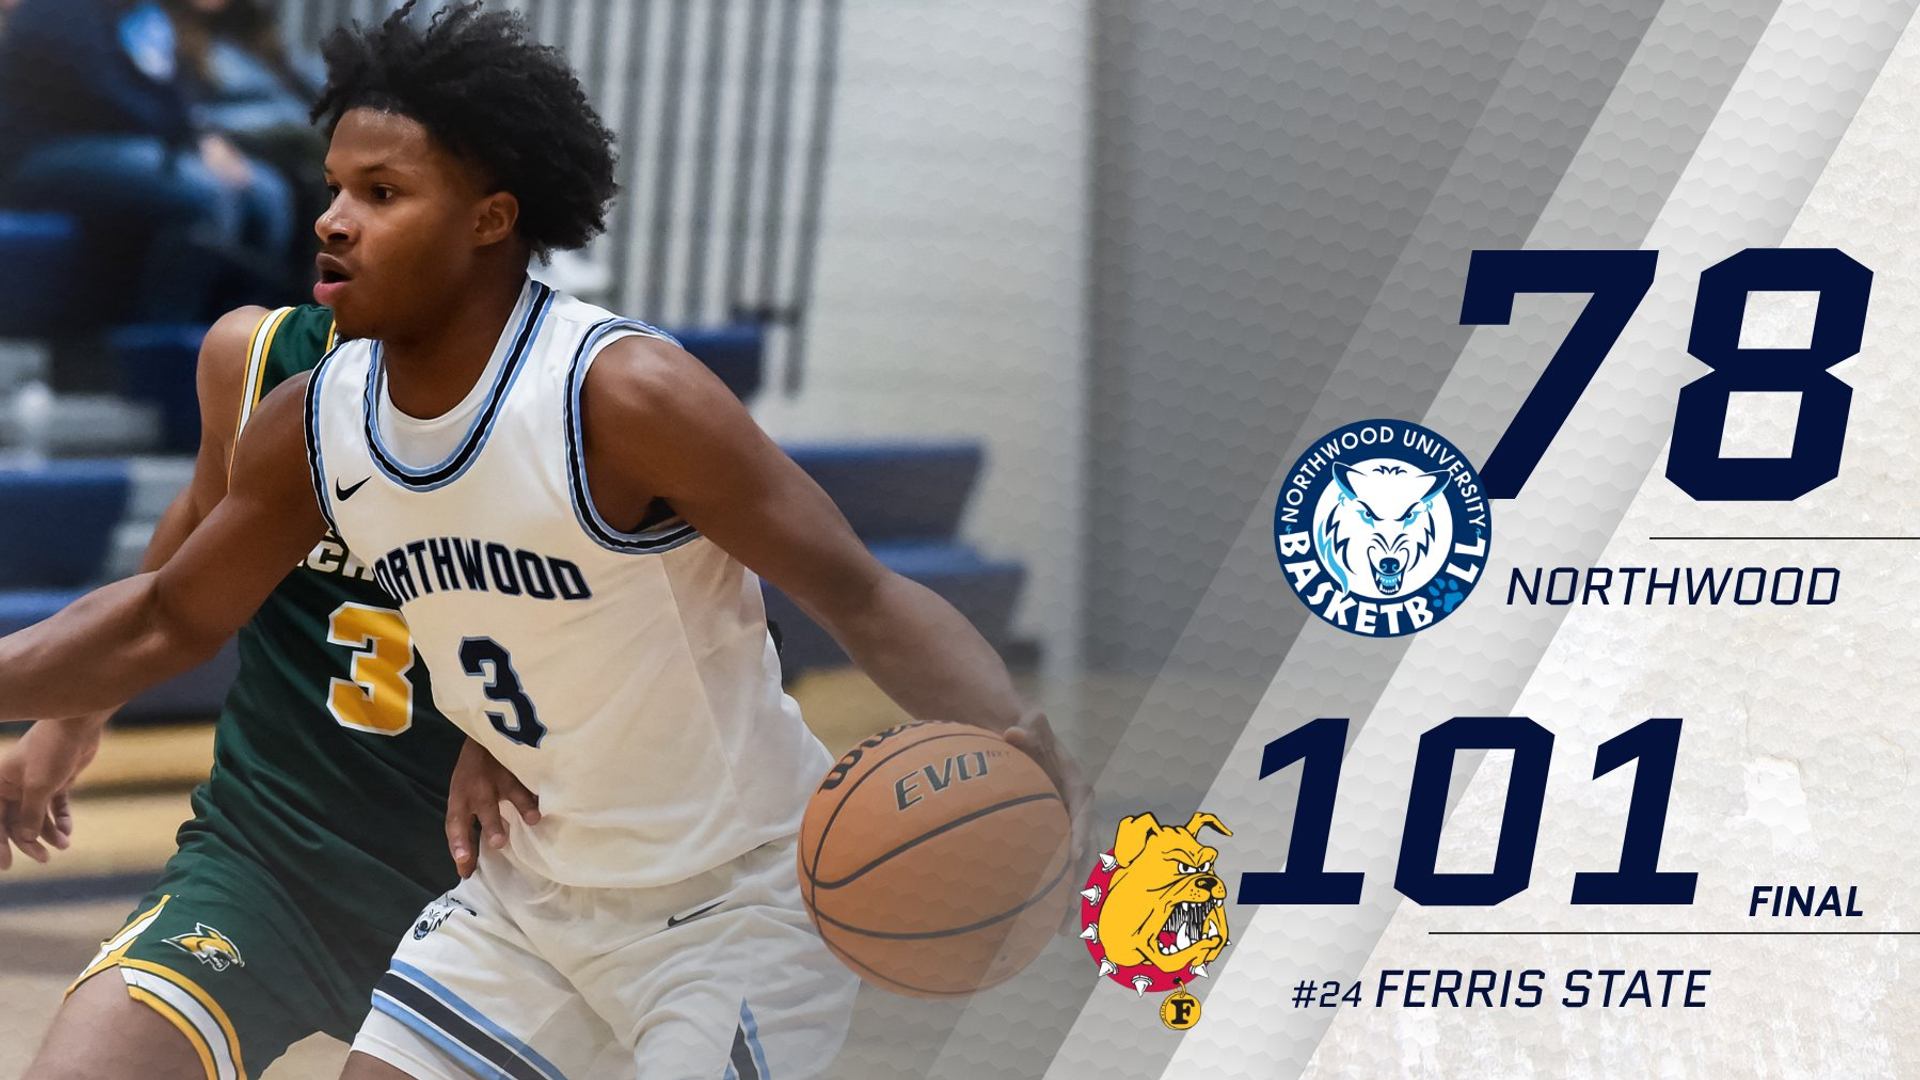 Men's Basketball Drops 101-78 Contest To No. 24 Ferris State